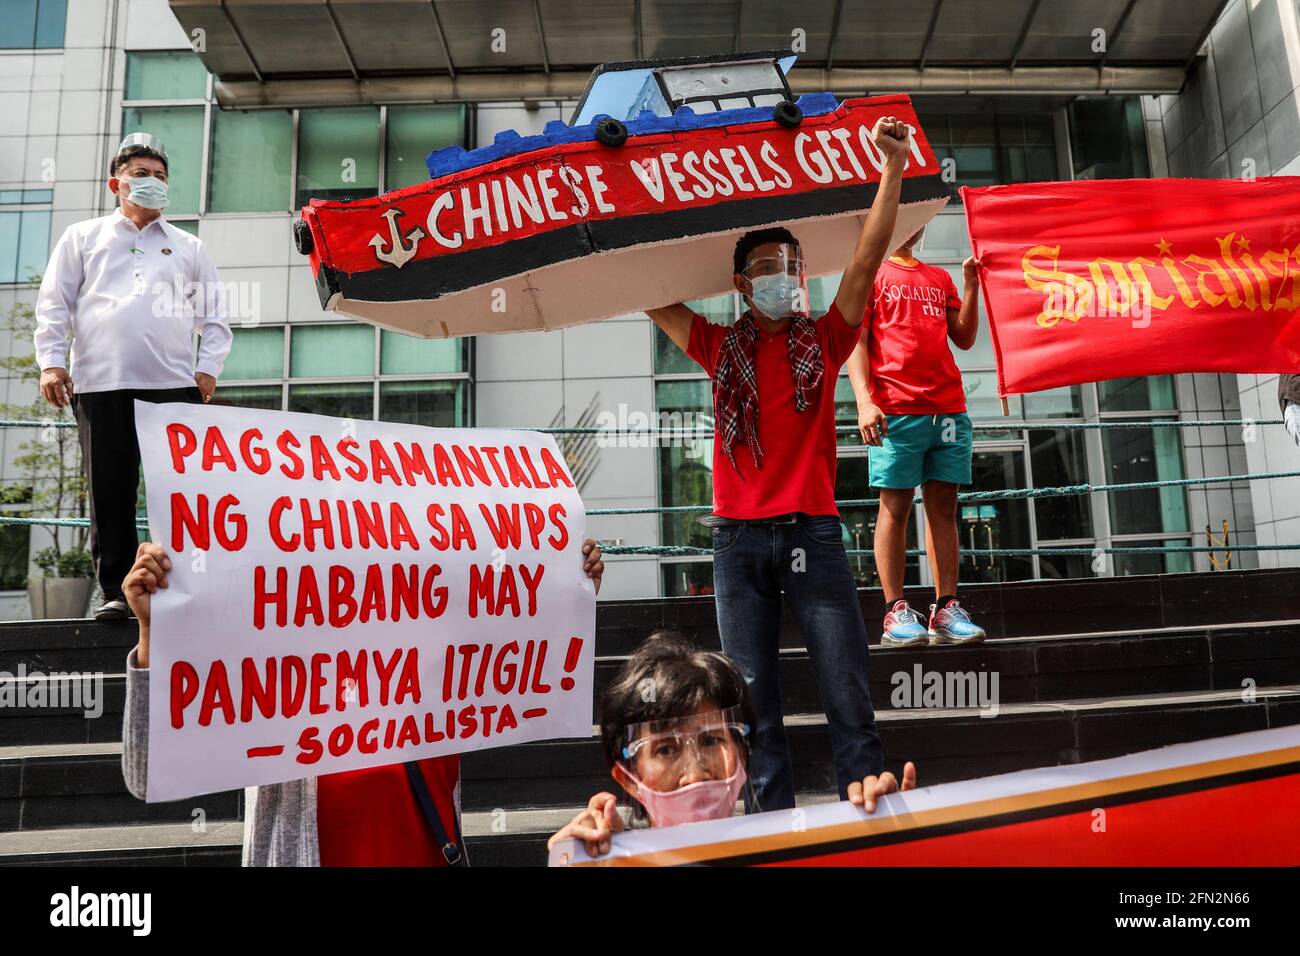 Filipino activists hold placards against China’s alleged continued occupation of islands in the South China Sea as they protest outside the Chinese Consulate in Makati City, metropolitan Manila. The protesters called on the government to act swiftly and uphold national sovereignty following China's growing presence in the disputed islands and reefs in South China Sea, where Chinese vessels believed to be operated by militia have been spotted within Philippine territorial waters. Philippines. Stock Photo